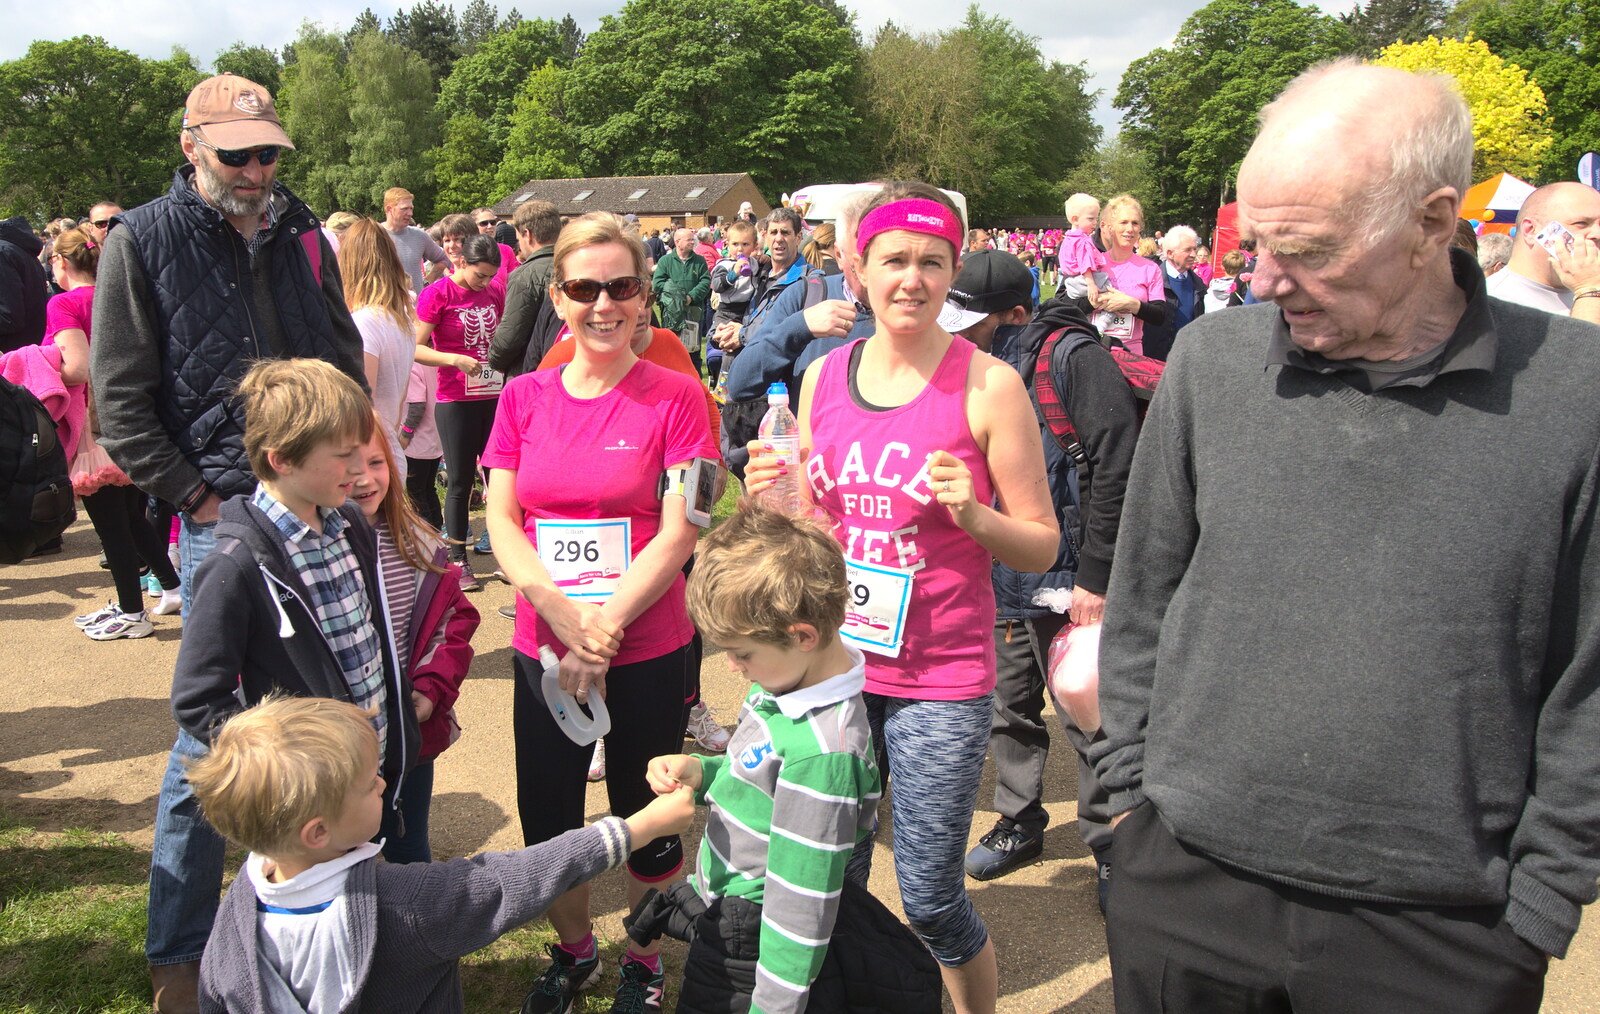 Isobel, Grandad and the boys from Isobel's Race for Life, Costessey, Norwich - 15th May 2016